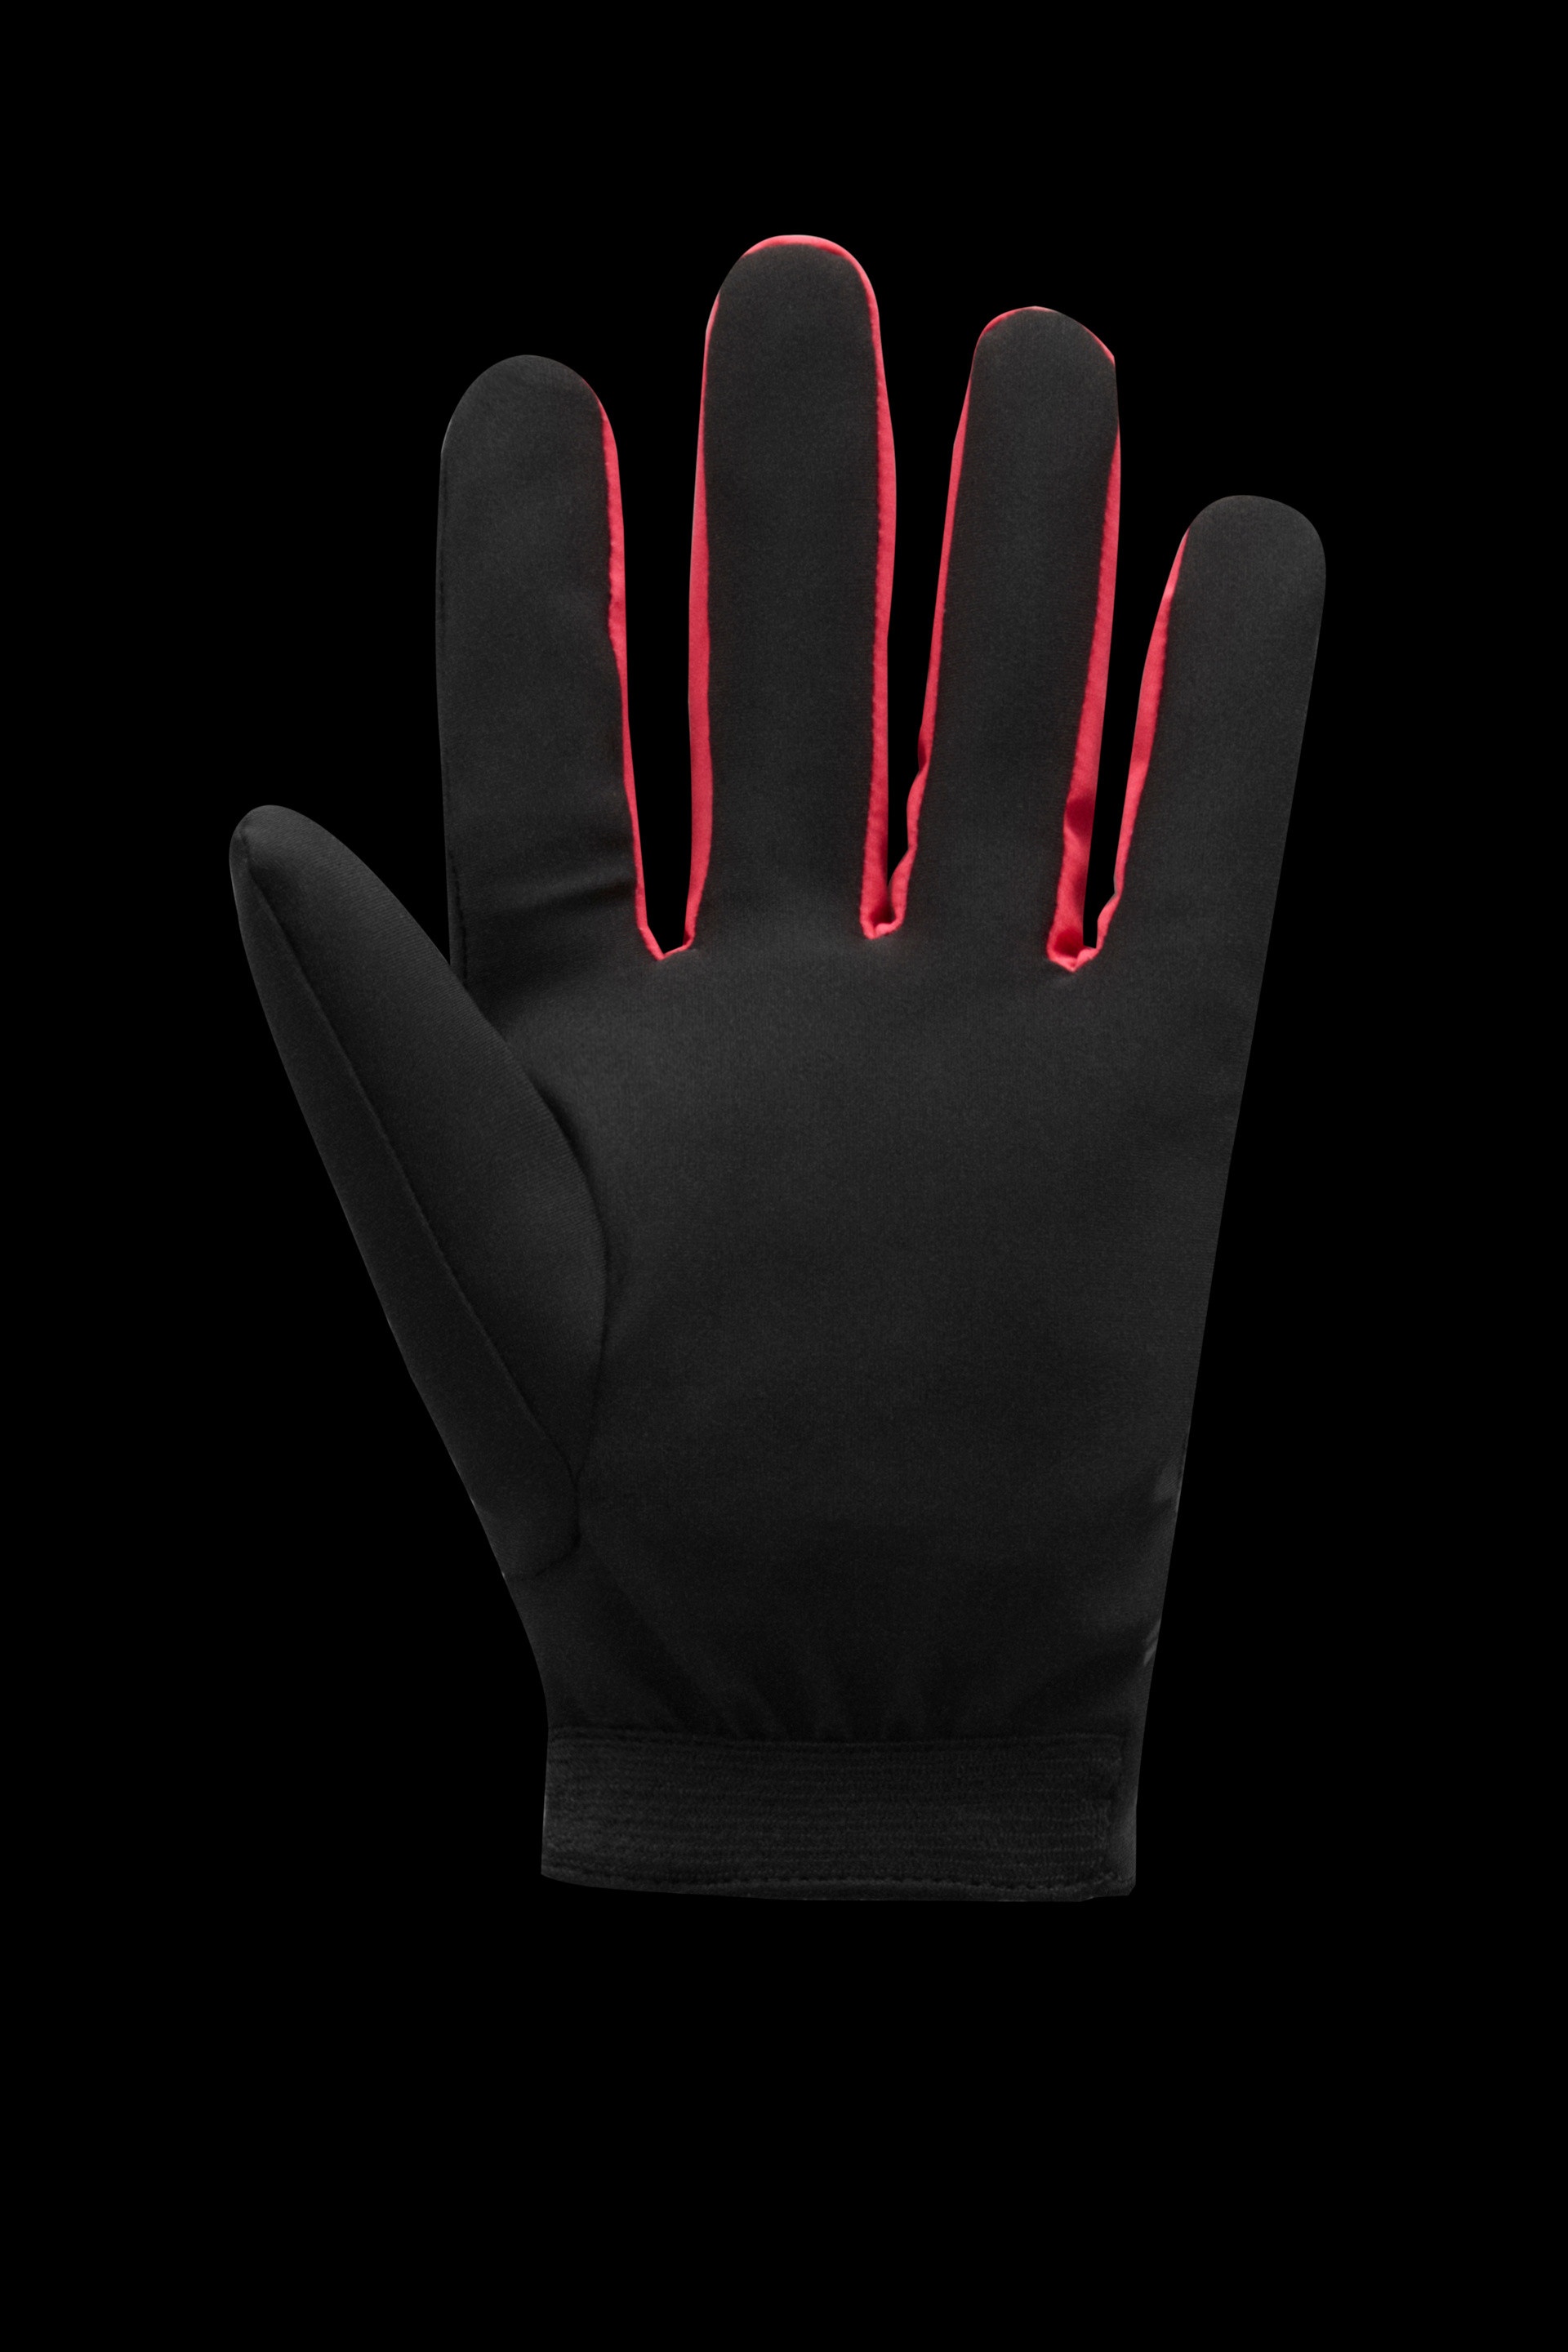 Gloves With Neon Details - 6